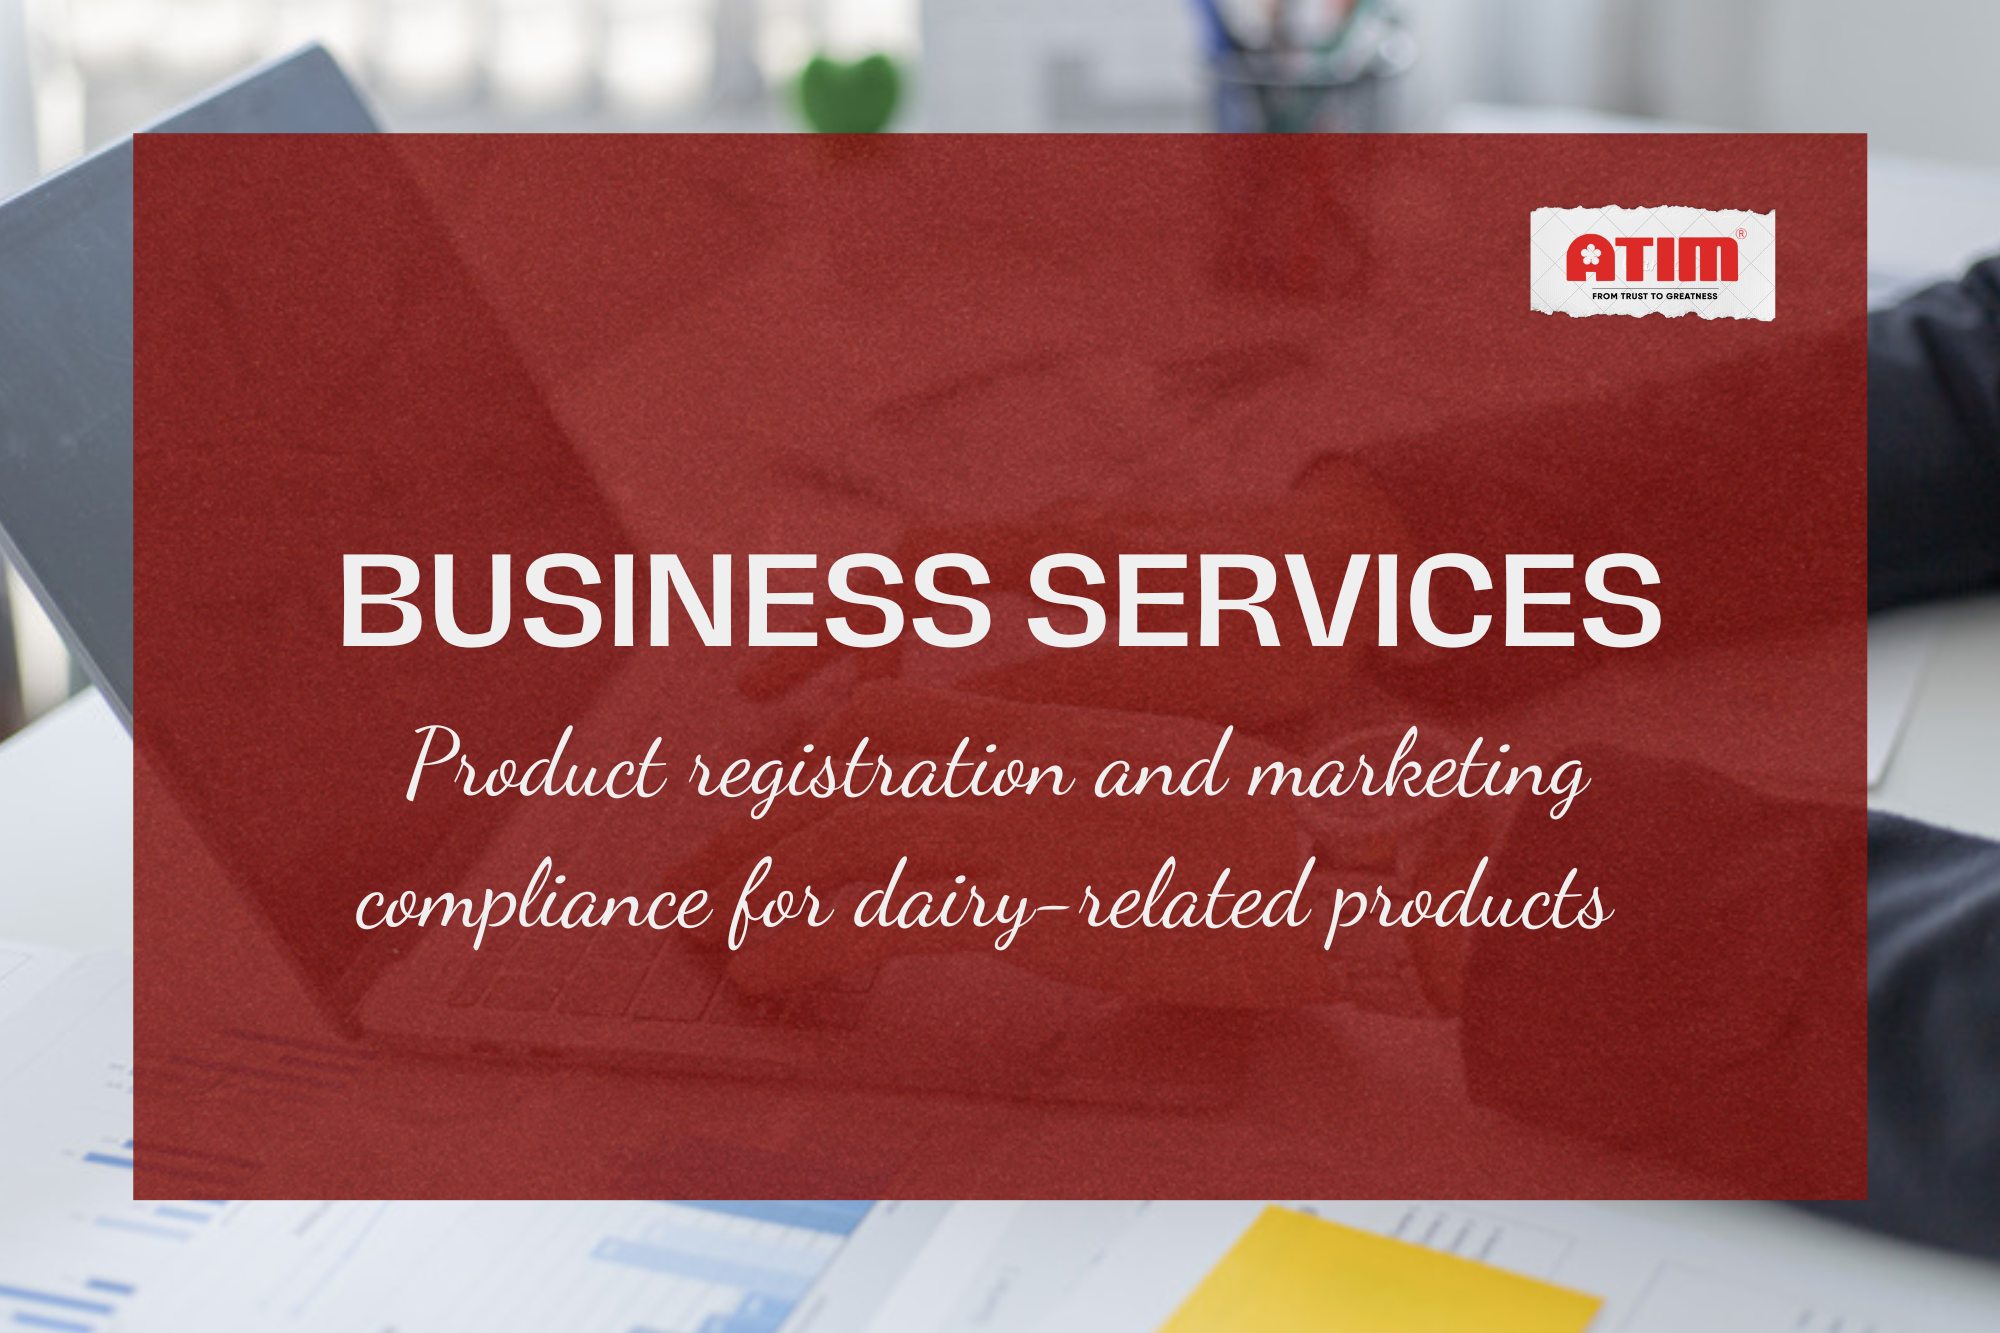 Business Service - Product registration and marketing compliance for dairy-related products 